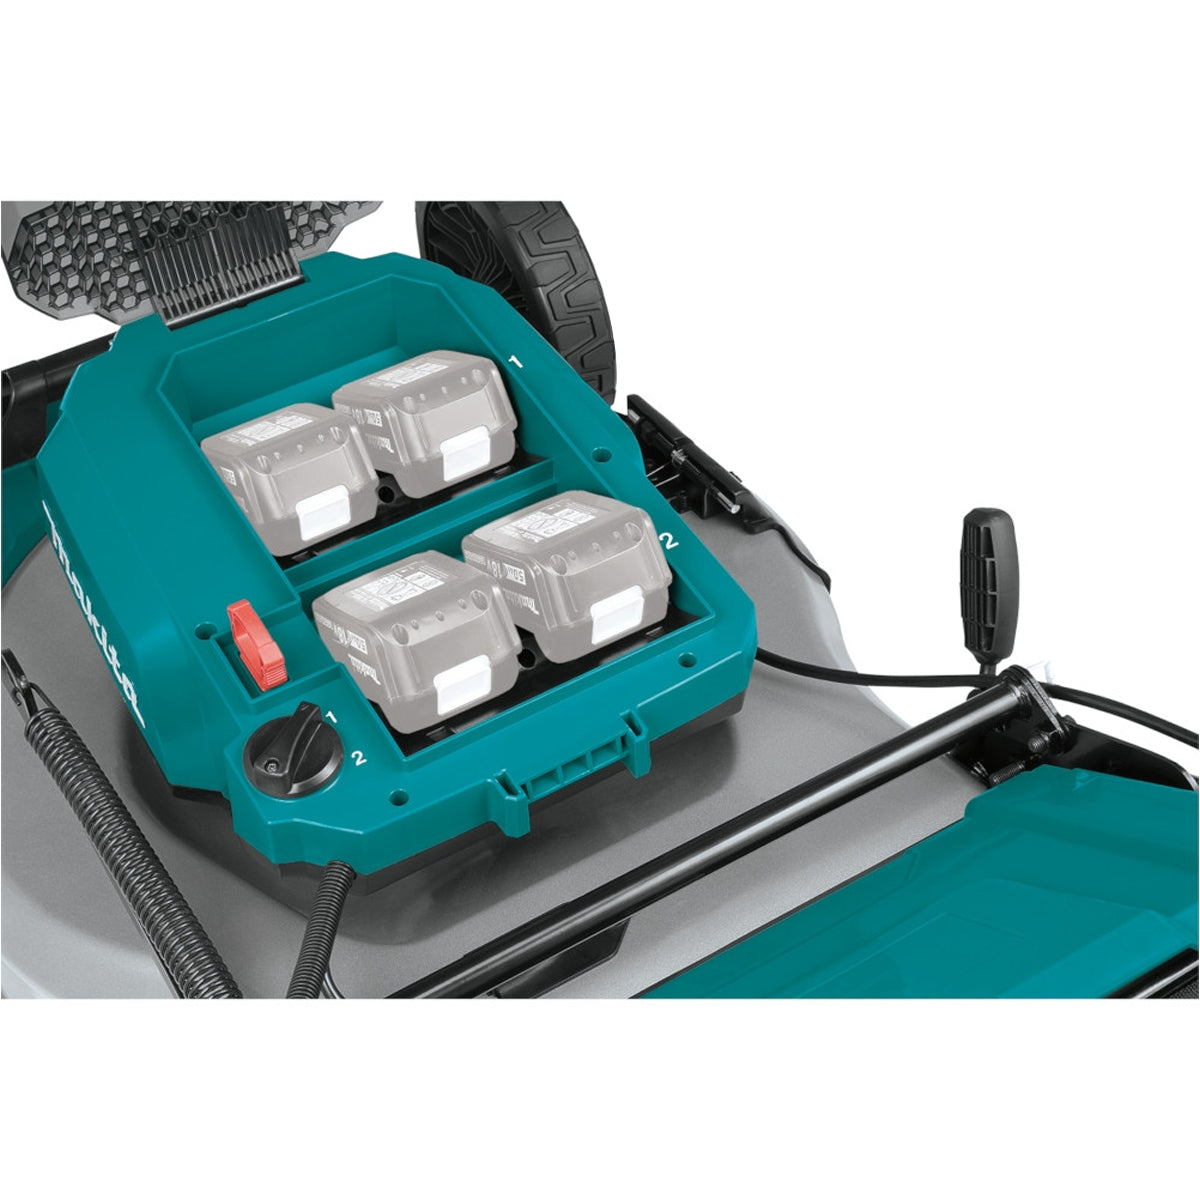 Makita DLM532PT4 36V Brushless Lawn Mower 534mm with 4 x 5.0Ah Batteries & Charger